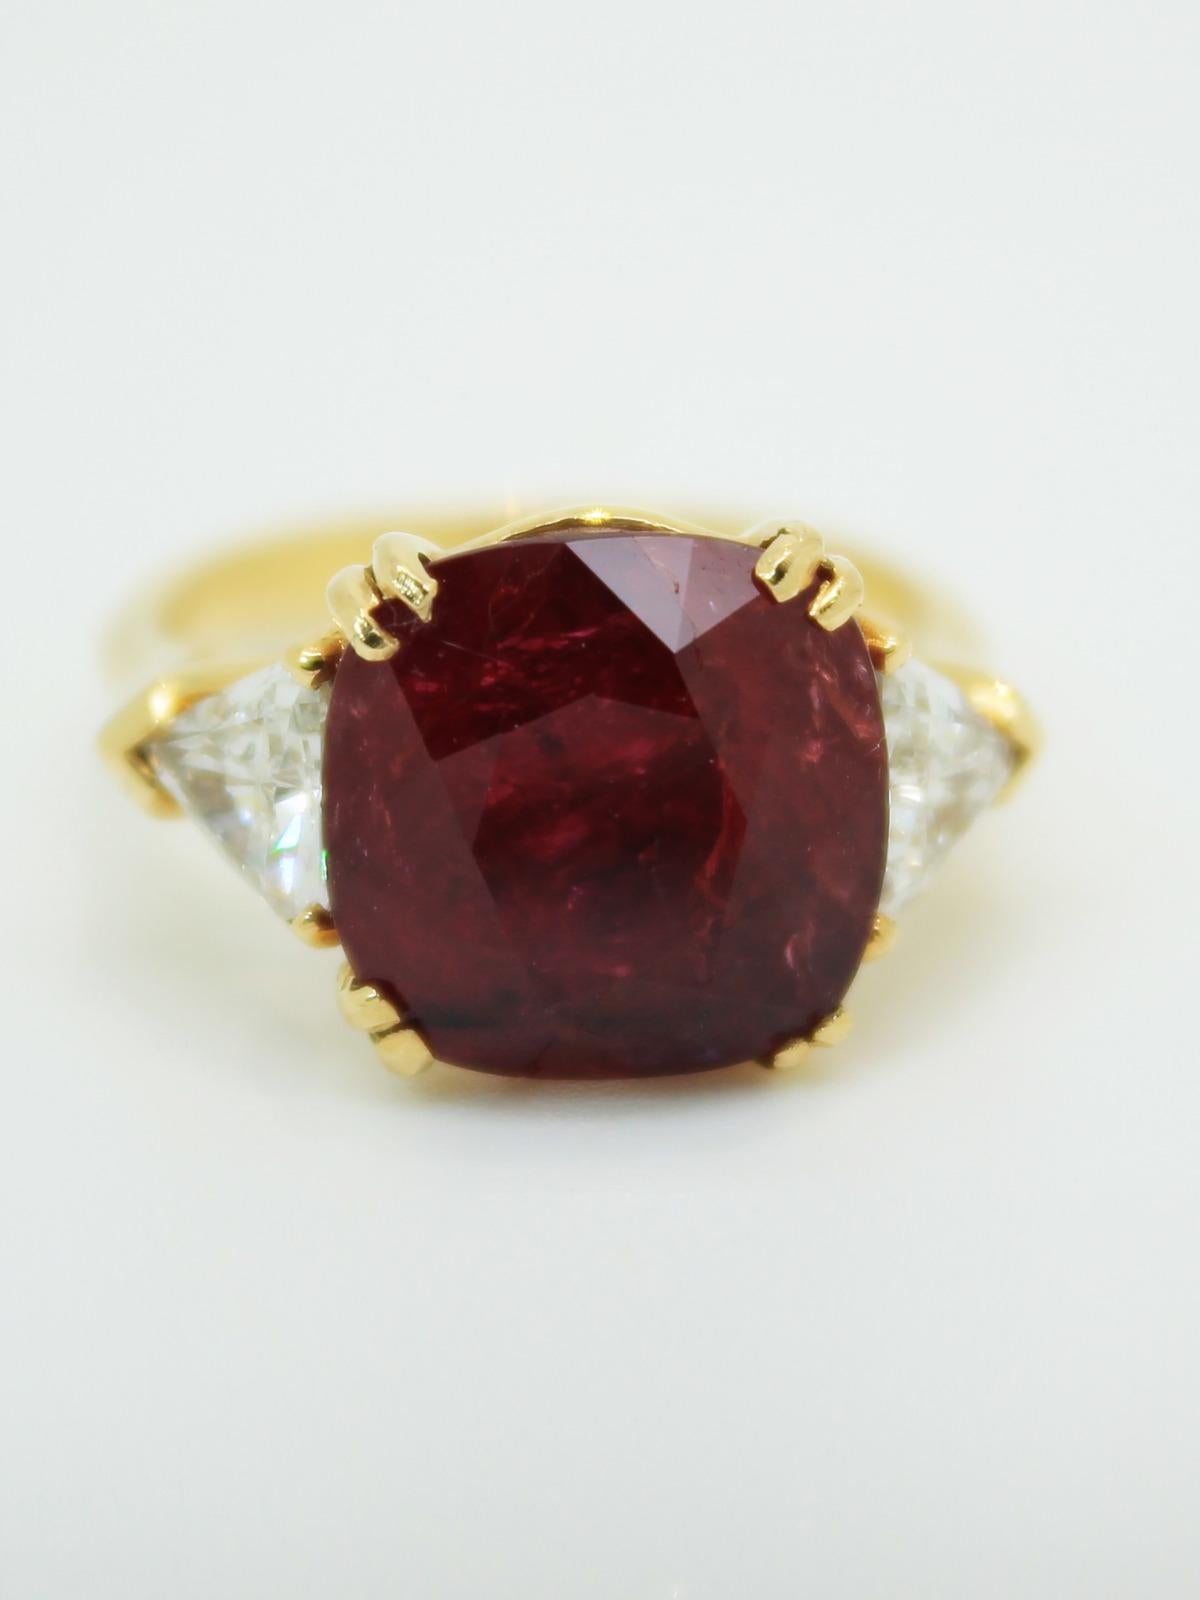 A bespoke and impressive three stone ruby and diamond ring, set in 18 karat gold. The ruby measures 7.83 carats and has been certified by C. Dunaigre Consulting an independent and experienced gemstone expert based in Switzerland.

The ruby report